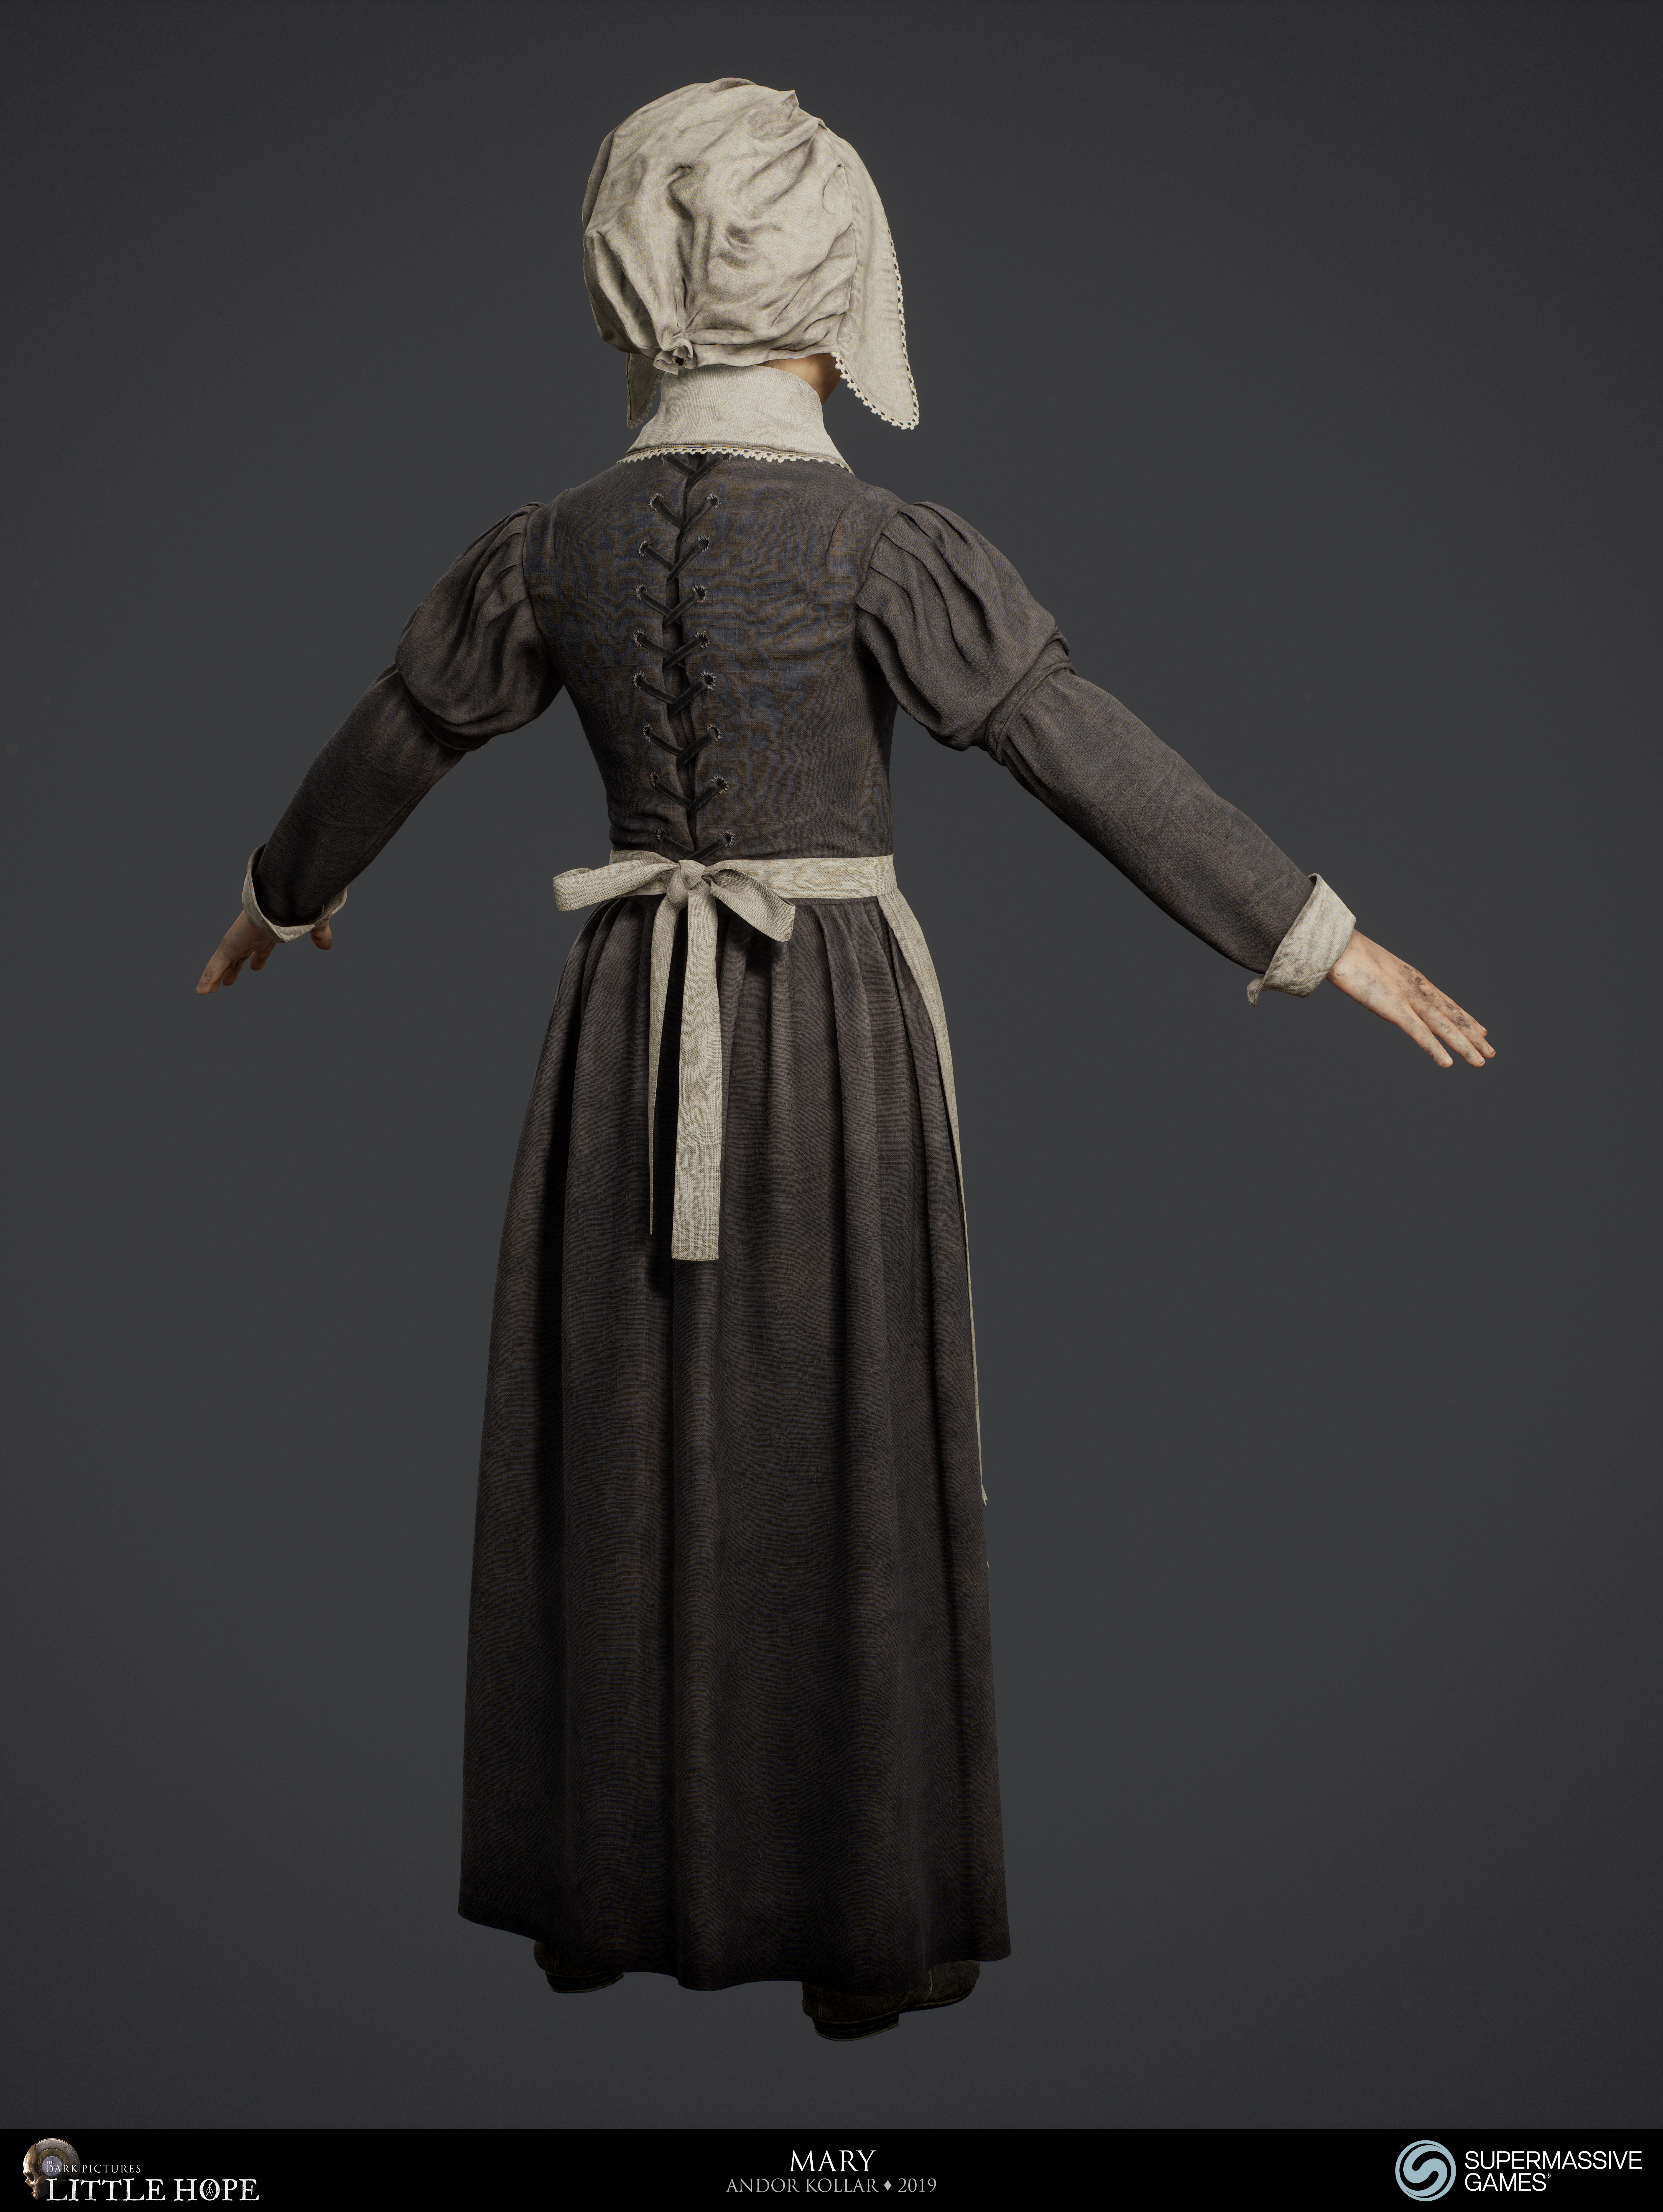 Little Hope, 3d game character, Mary, little girl with 17th century dress, bonnet, skirt, ribbon, Unreal Engine, Andor Kollar